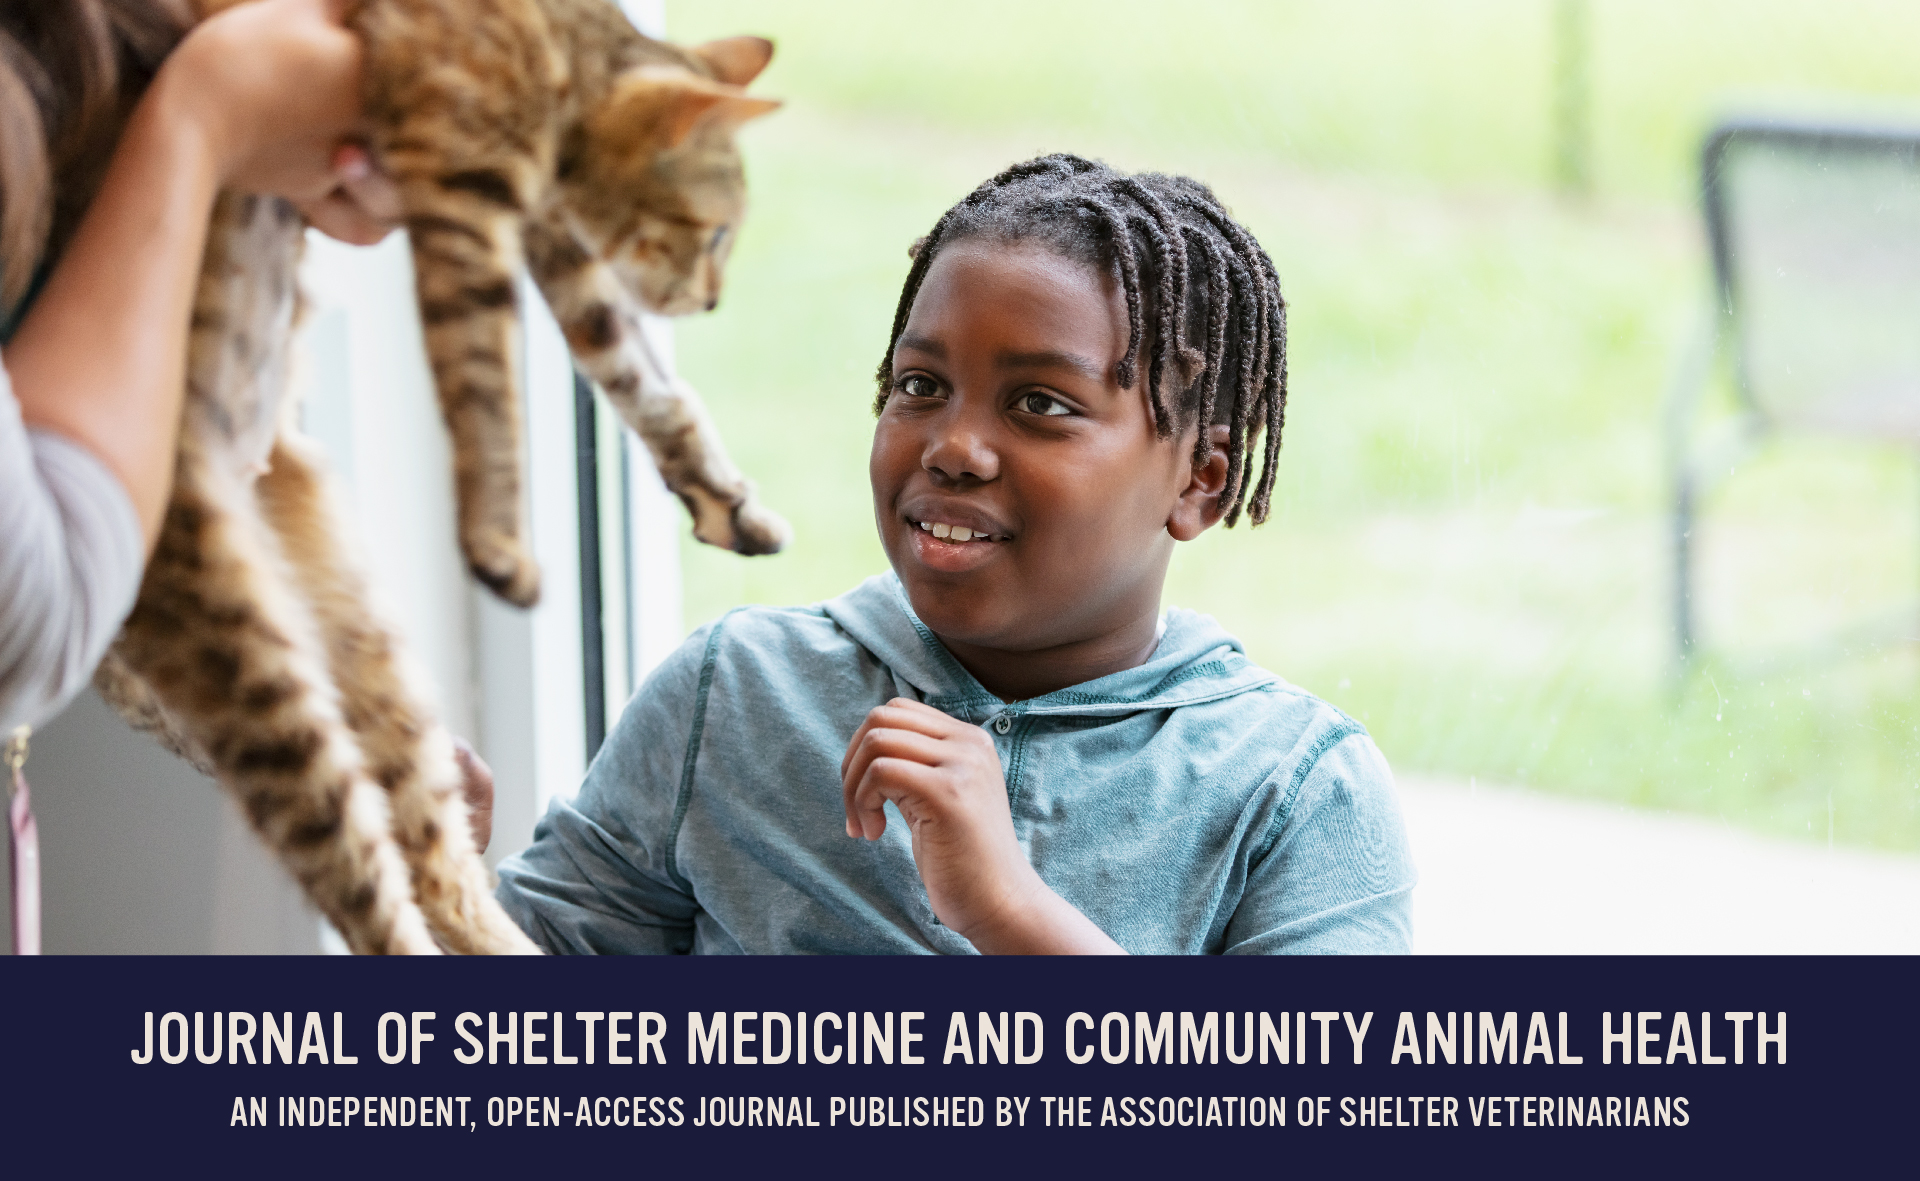 An independent online journal published by the Association of Shelter Veterinarians